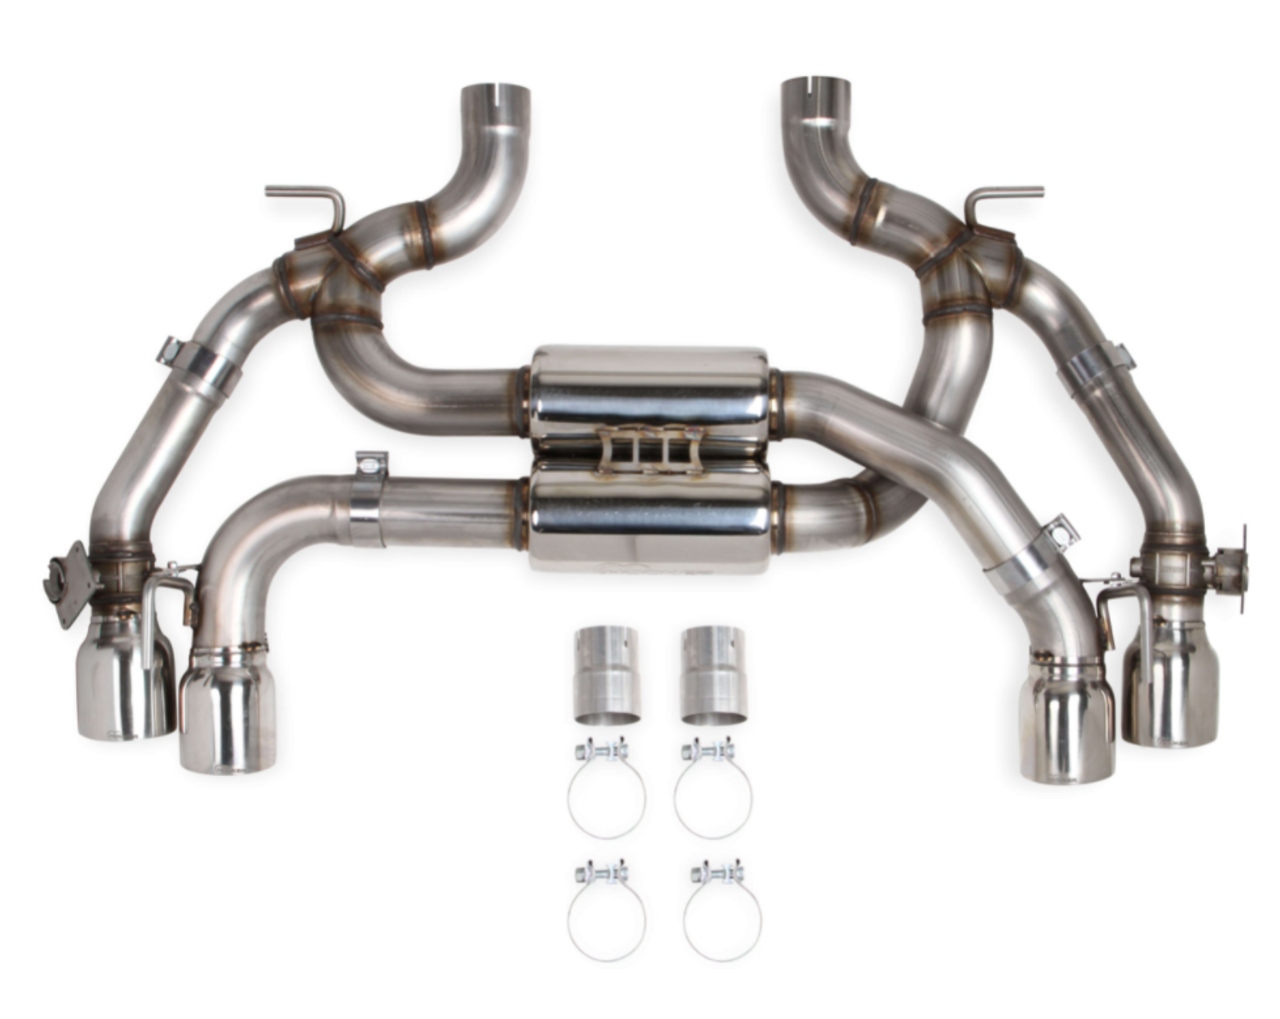 Hooker Exhaust System, Blackheart, Axle Back, 2-1/2" Tailpipe, 4" Tips, Stainless, Natural, V6, Chevy Camaro 2016-23 - clone